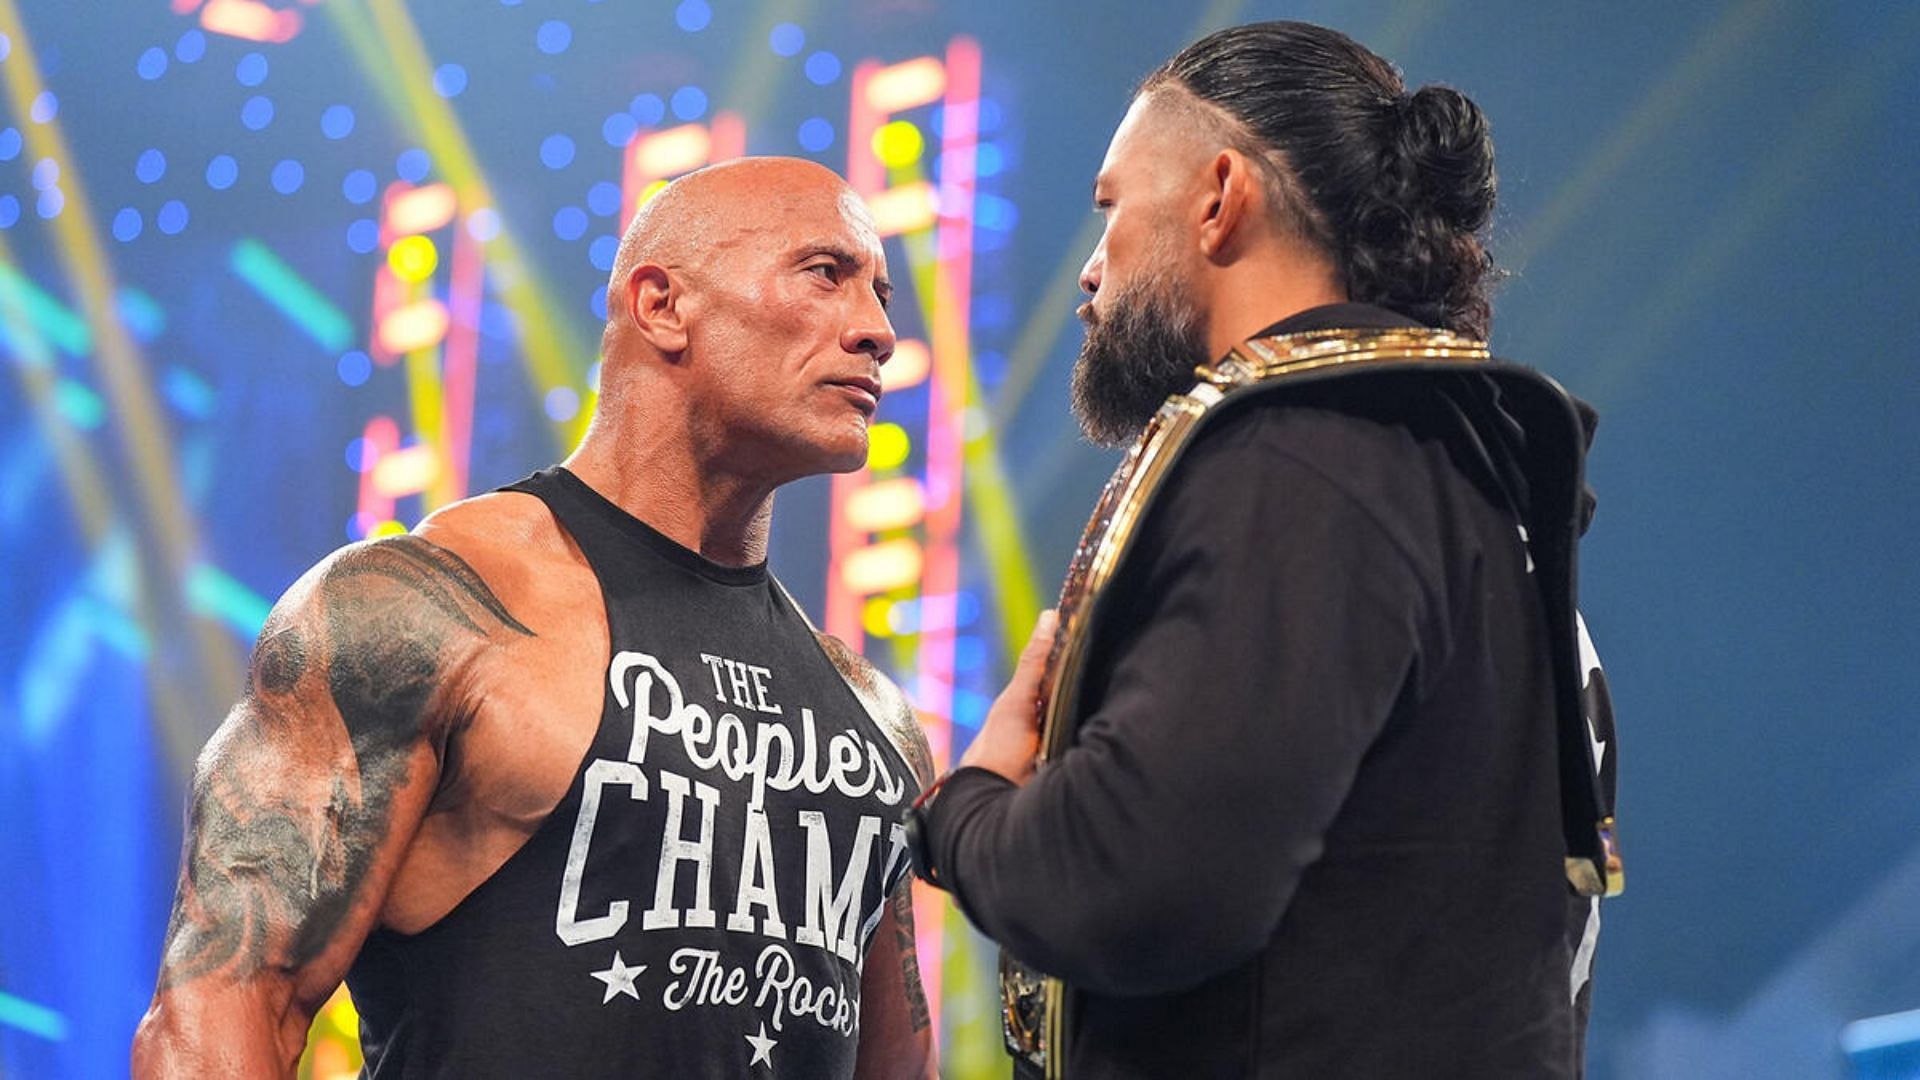 The Rock and Roman Reigns were looking forward to going one-on-one